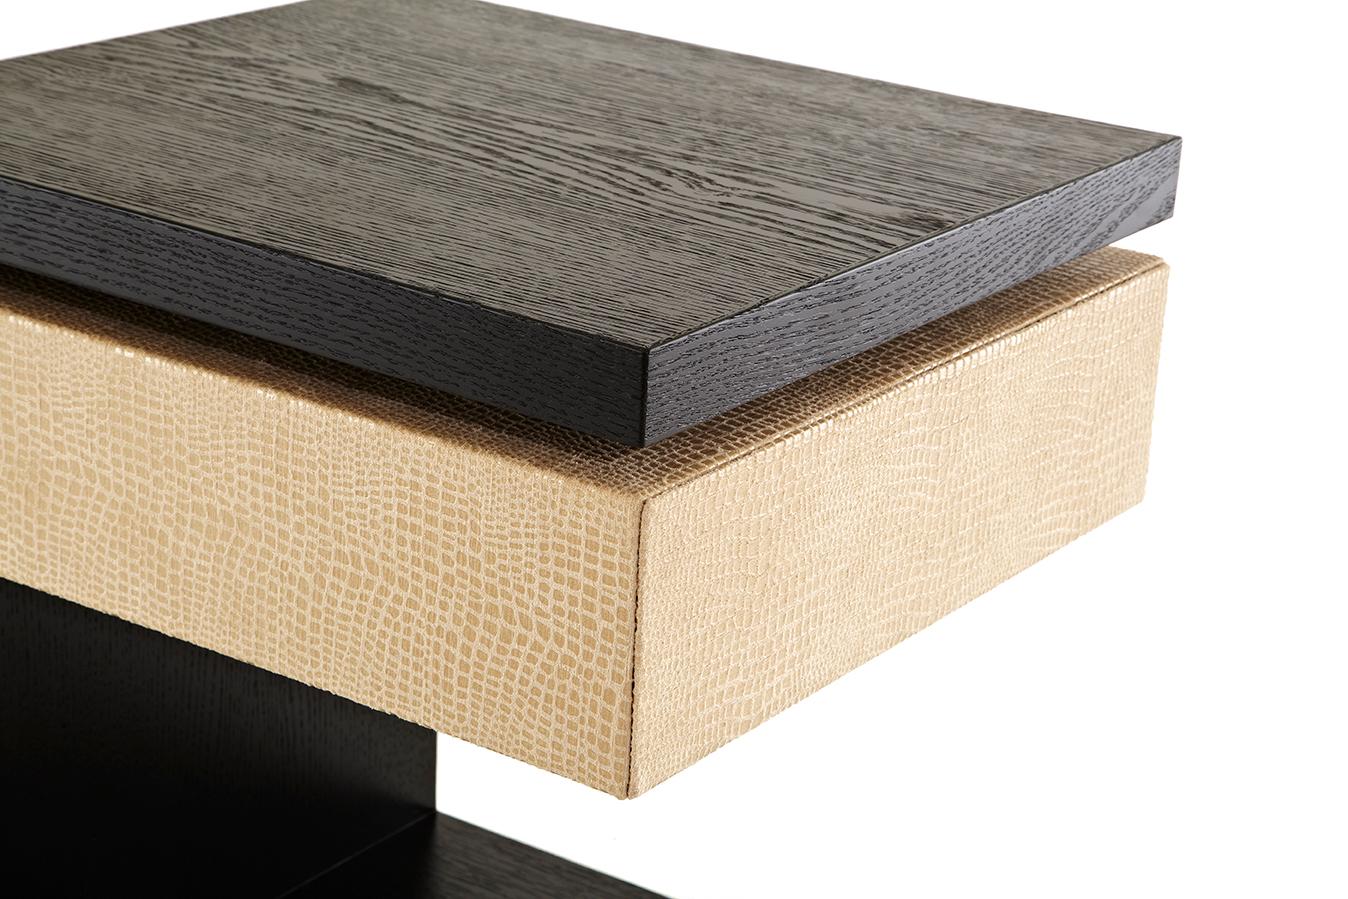 The Vesey side table provides a simple concept for a simple table with deep, rich stained oak and a floating box wrapped in luxurious faux boa skin. Its slim and clean profile is ideal for small spaces while the single drawer provides convenient